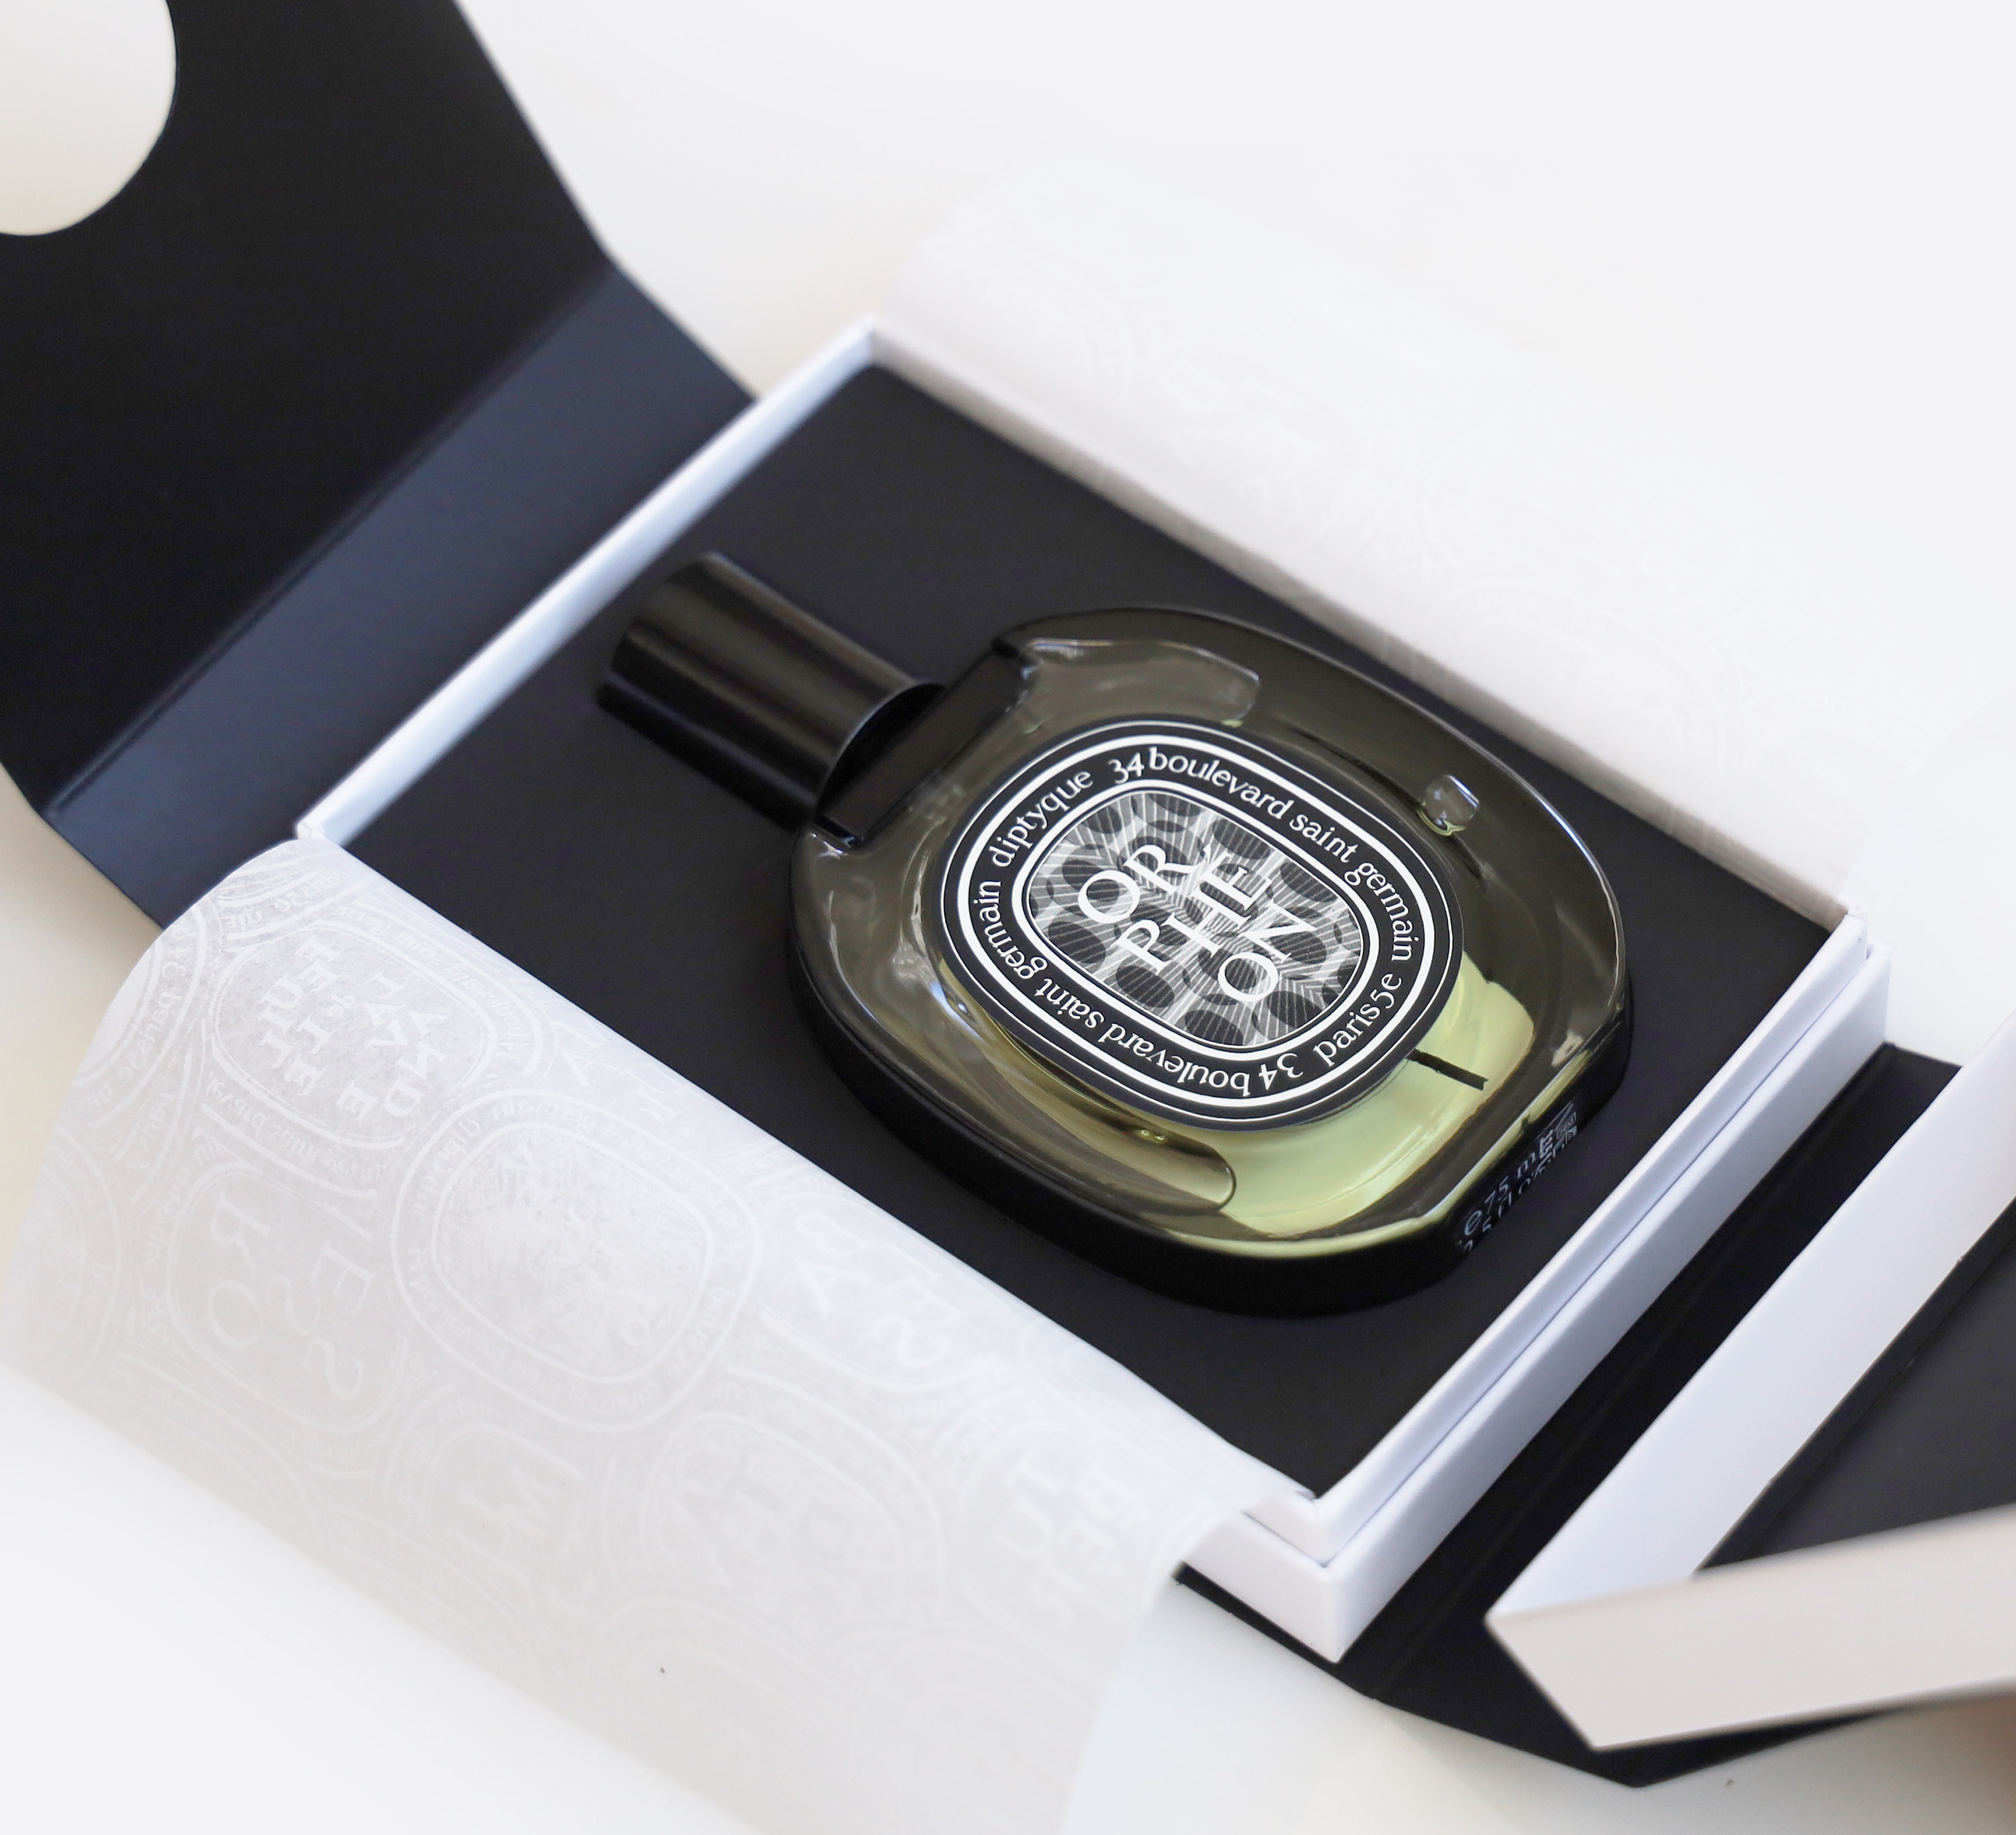 The New Orphéon by Diptyque Shows Multiple Facets: Woody, Floral and